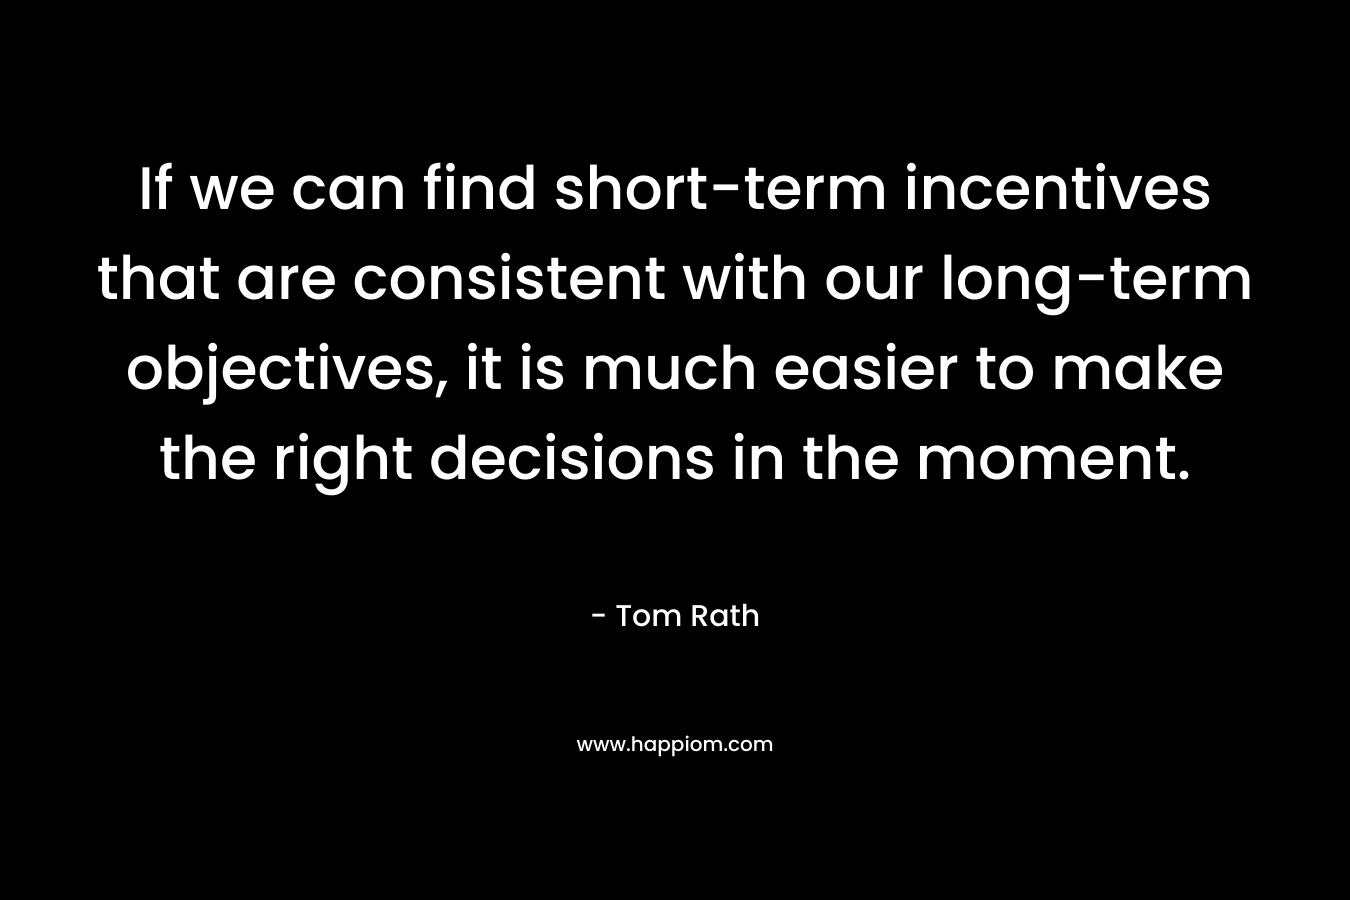 If we can find short-term incentives that are consistent with our long-term objectives, it is much easier to make the right decisions in the moment. – Tom Rath